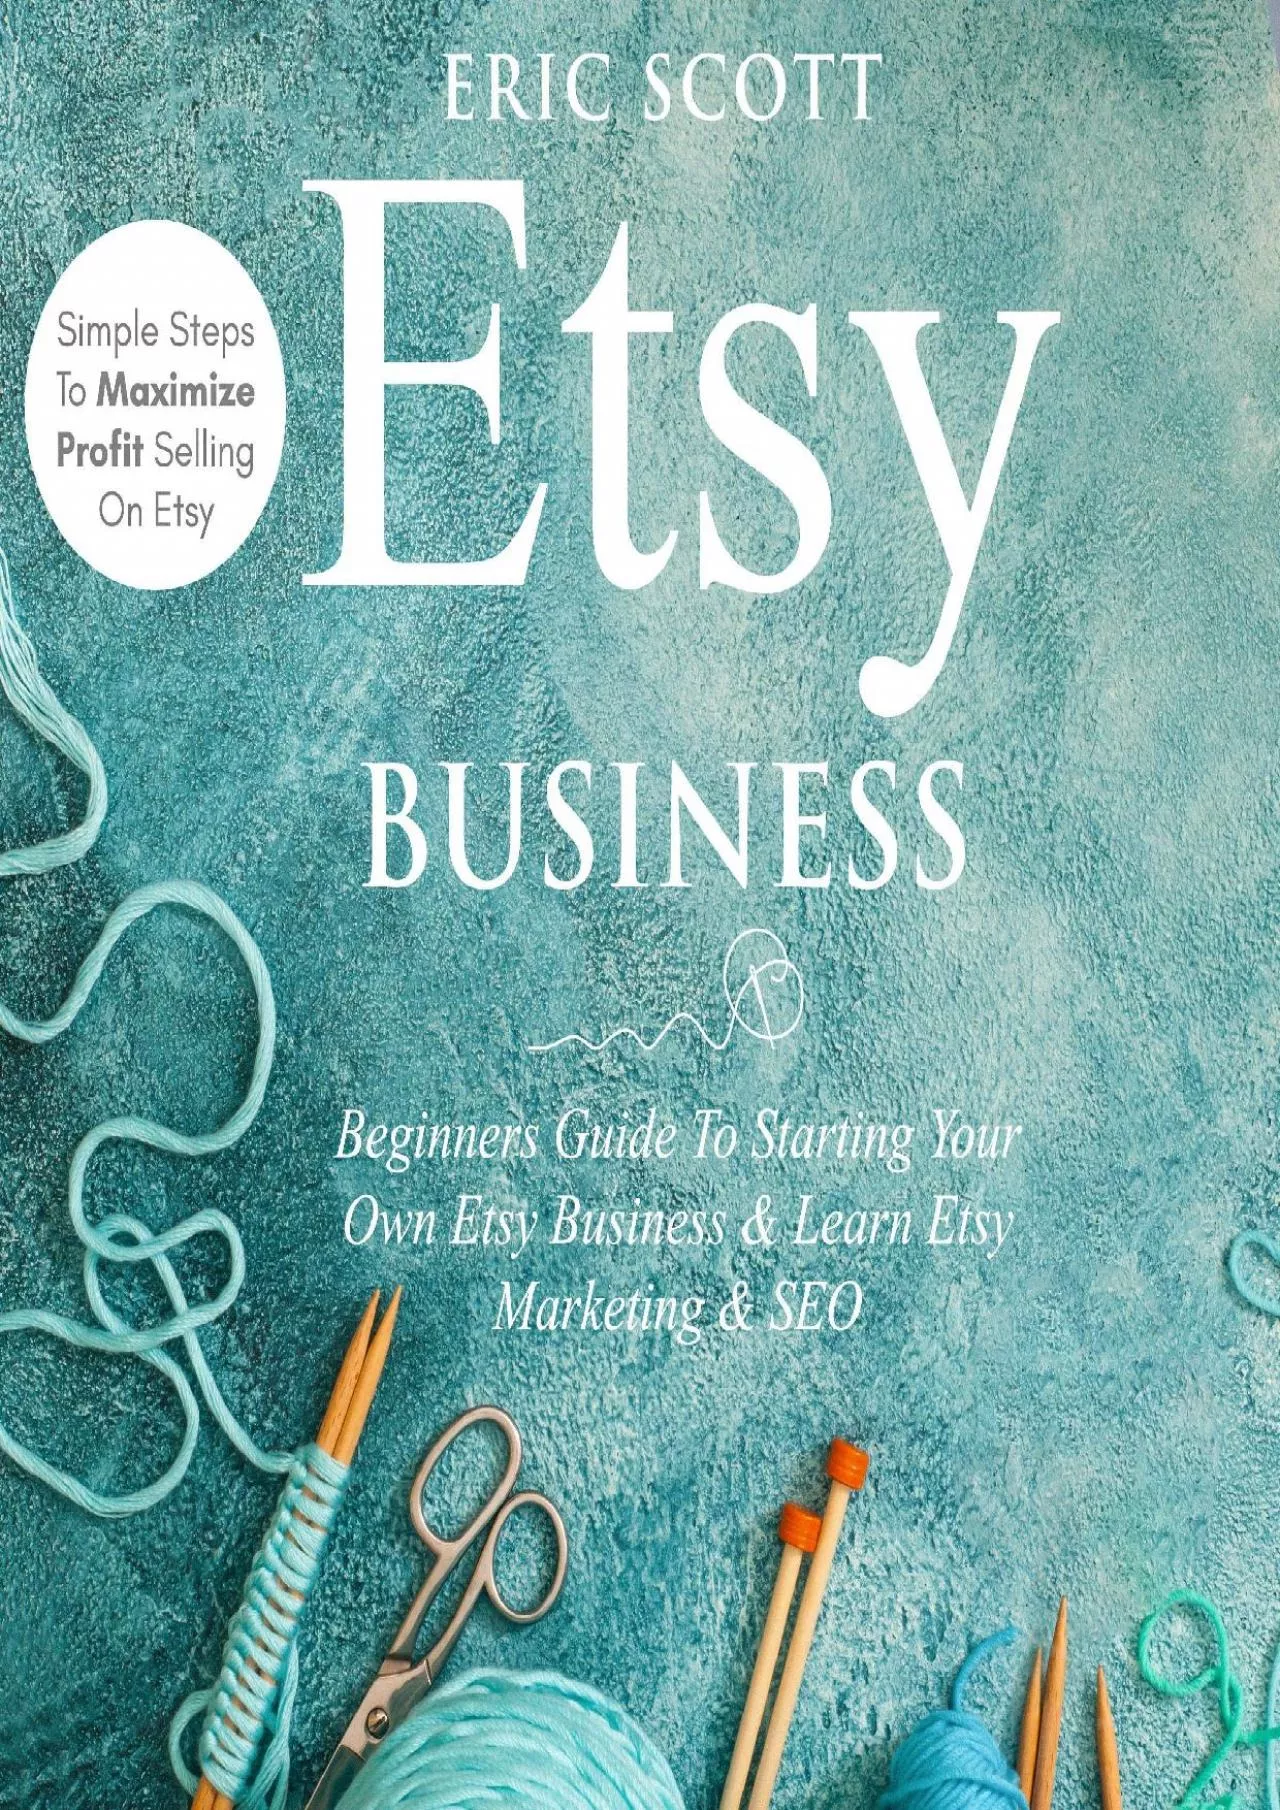 Etsy Business Beginners Guide to Starting Your Own Etsy Business and Learn Etsy Marketing